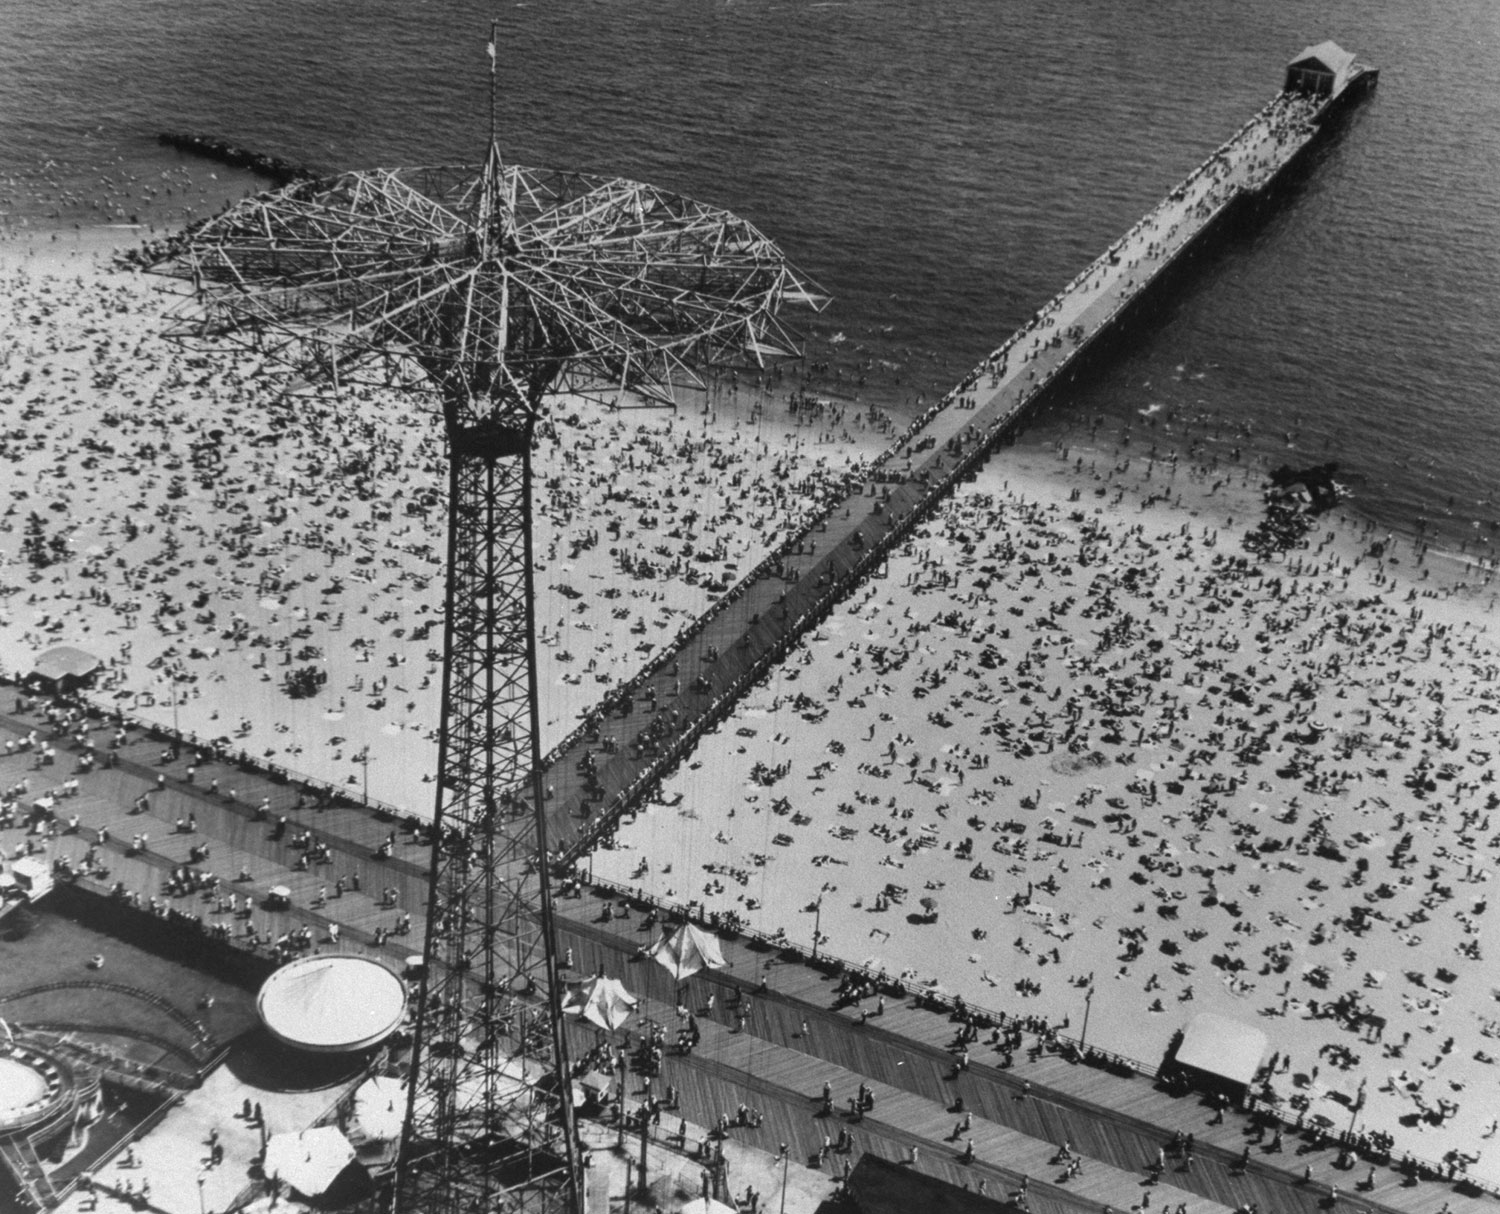 Coney Island, Brooklyn, photographed from a helicopter, 1952.